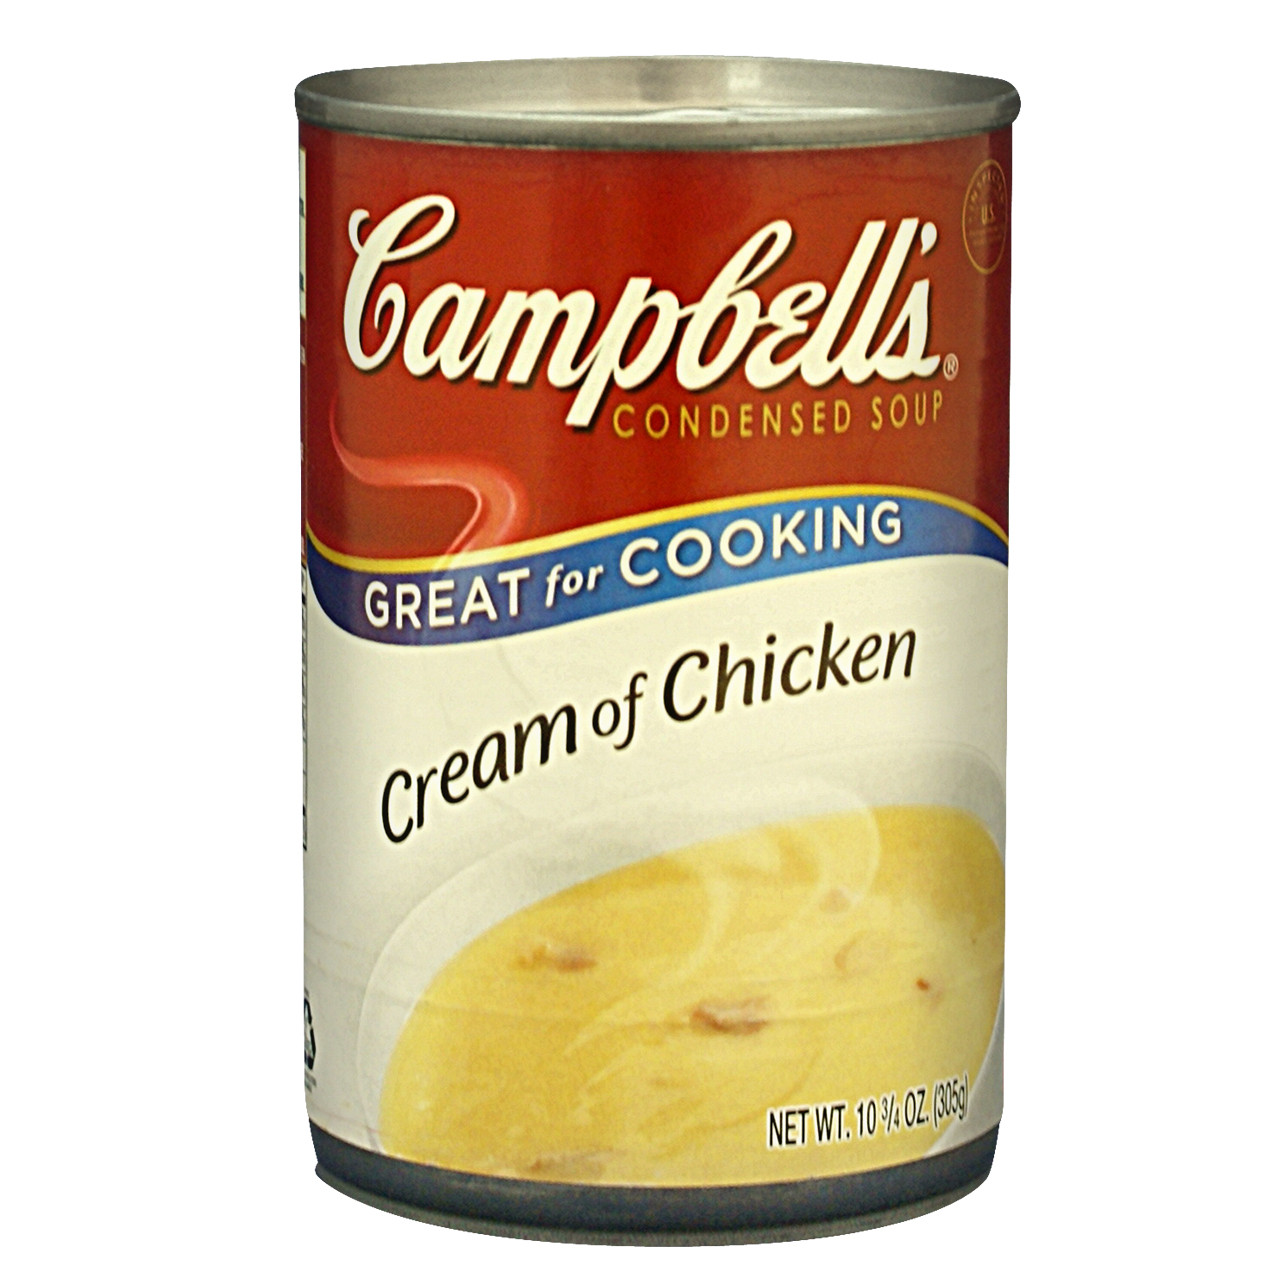 Campbells Recipes With Cream Of Chicken Soup
 CANNED GOODS SOUP PREPARED MEALS Campbell s Cream